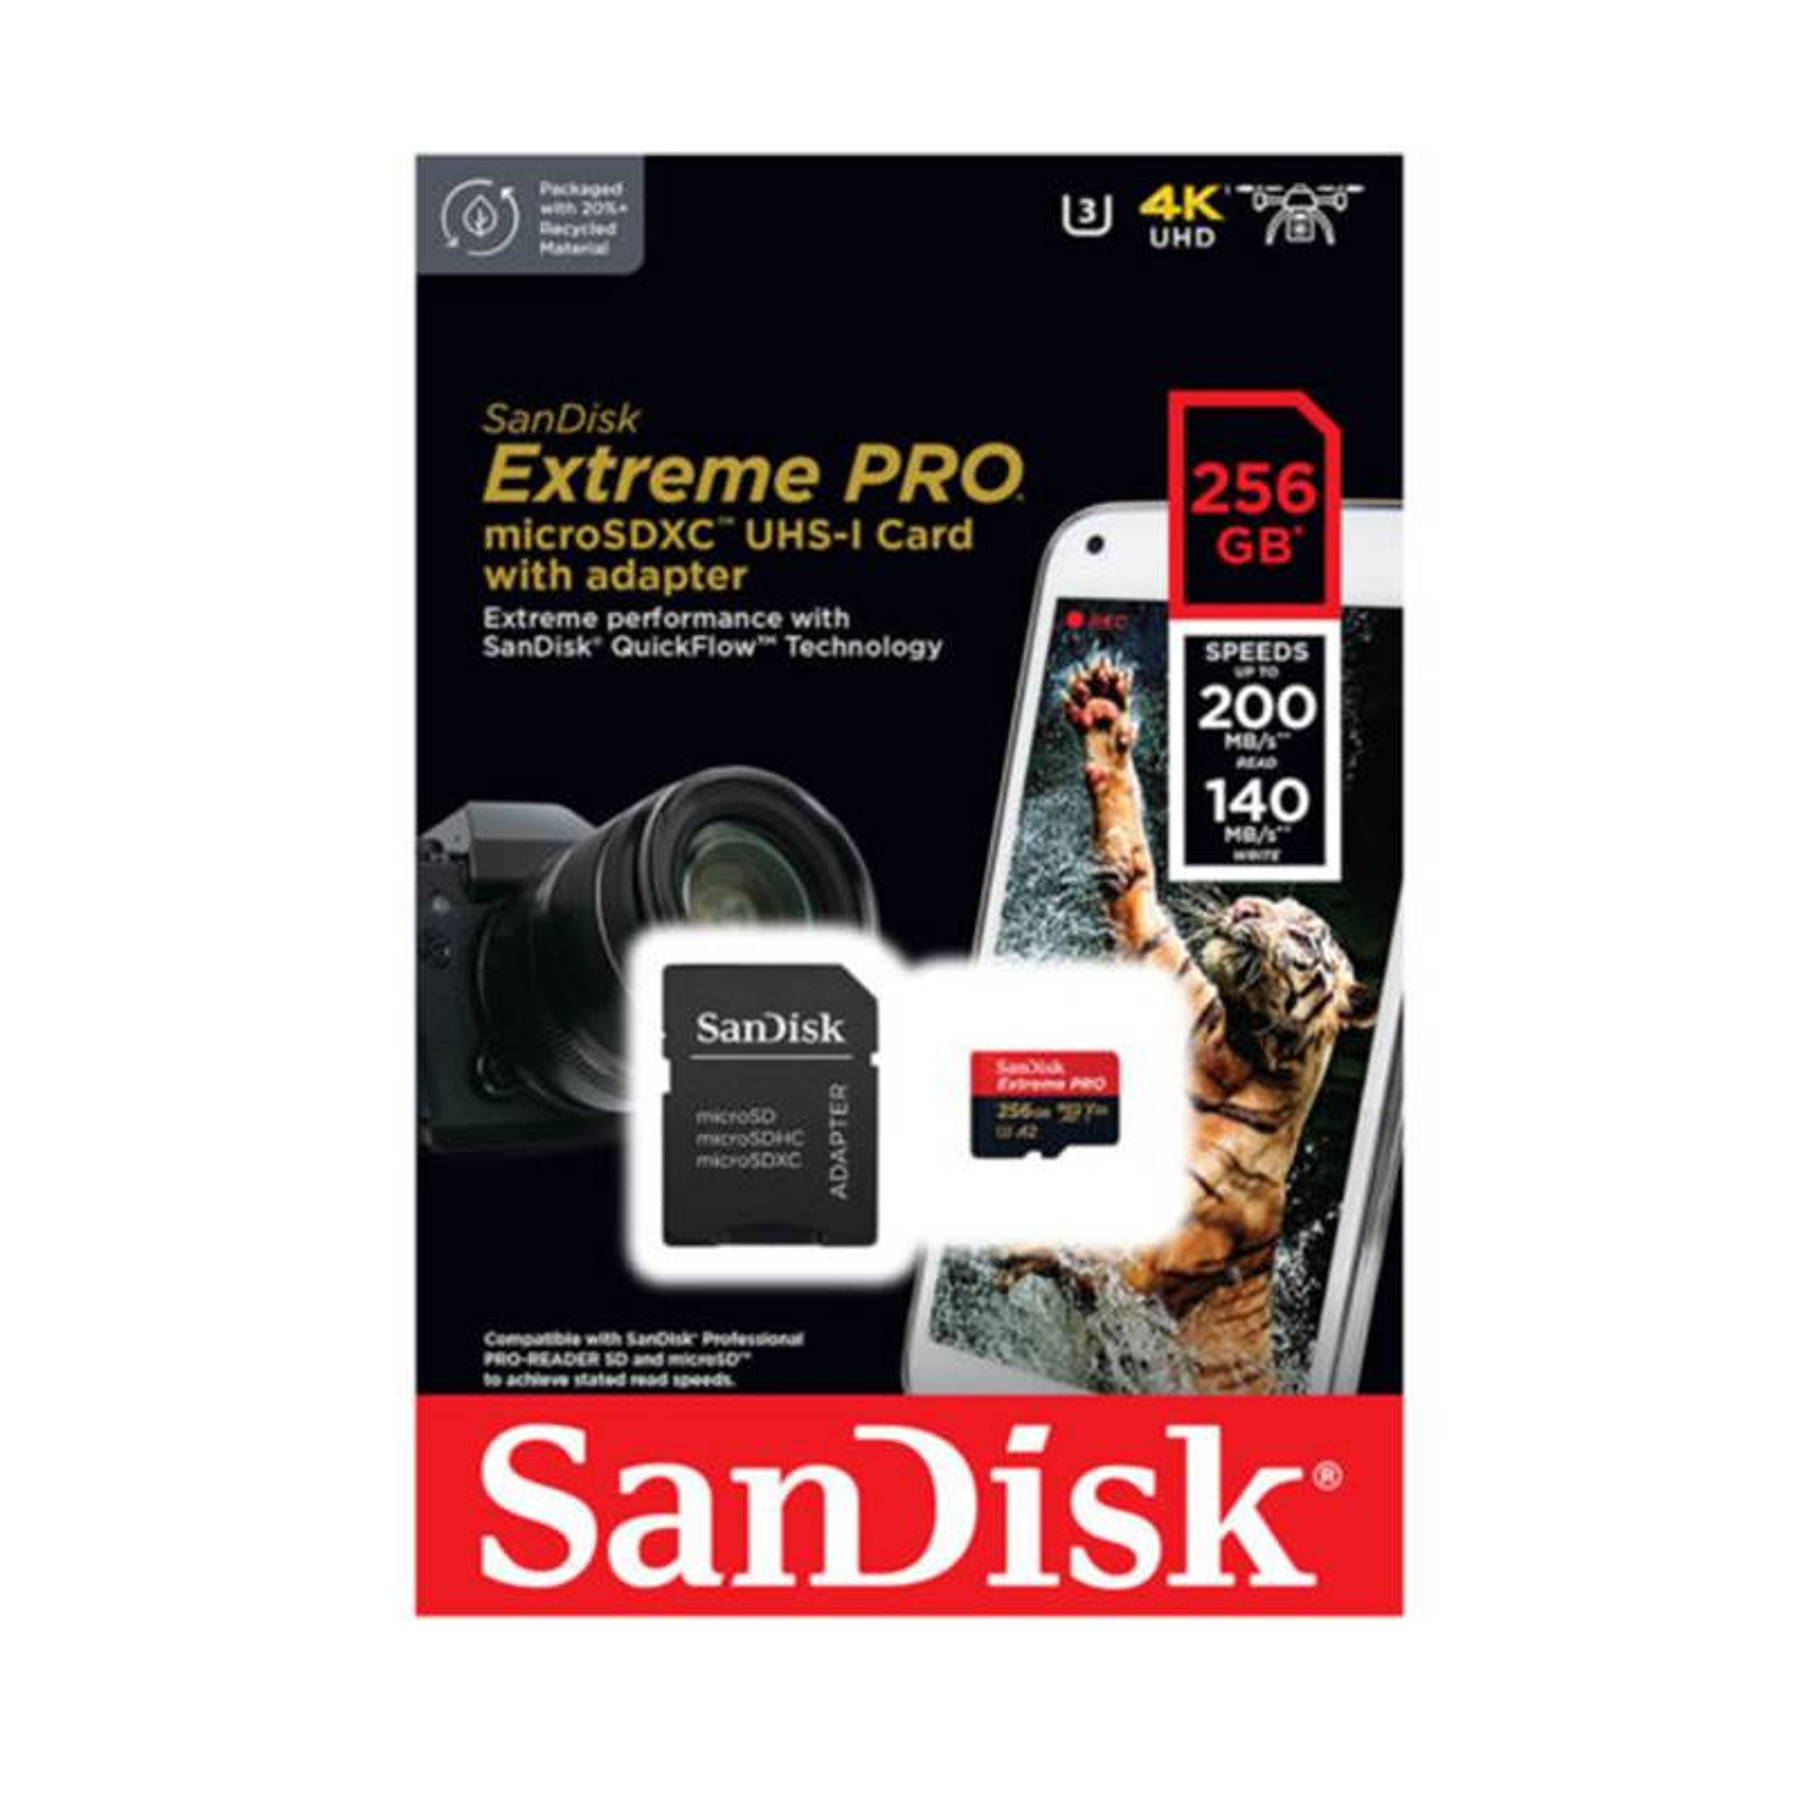 Memoria Micro SDHC 256GB Sandisk Extreme Pro, UHS-I Clase 10, con Adaptador, Up to 200 MB/s- 